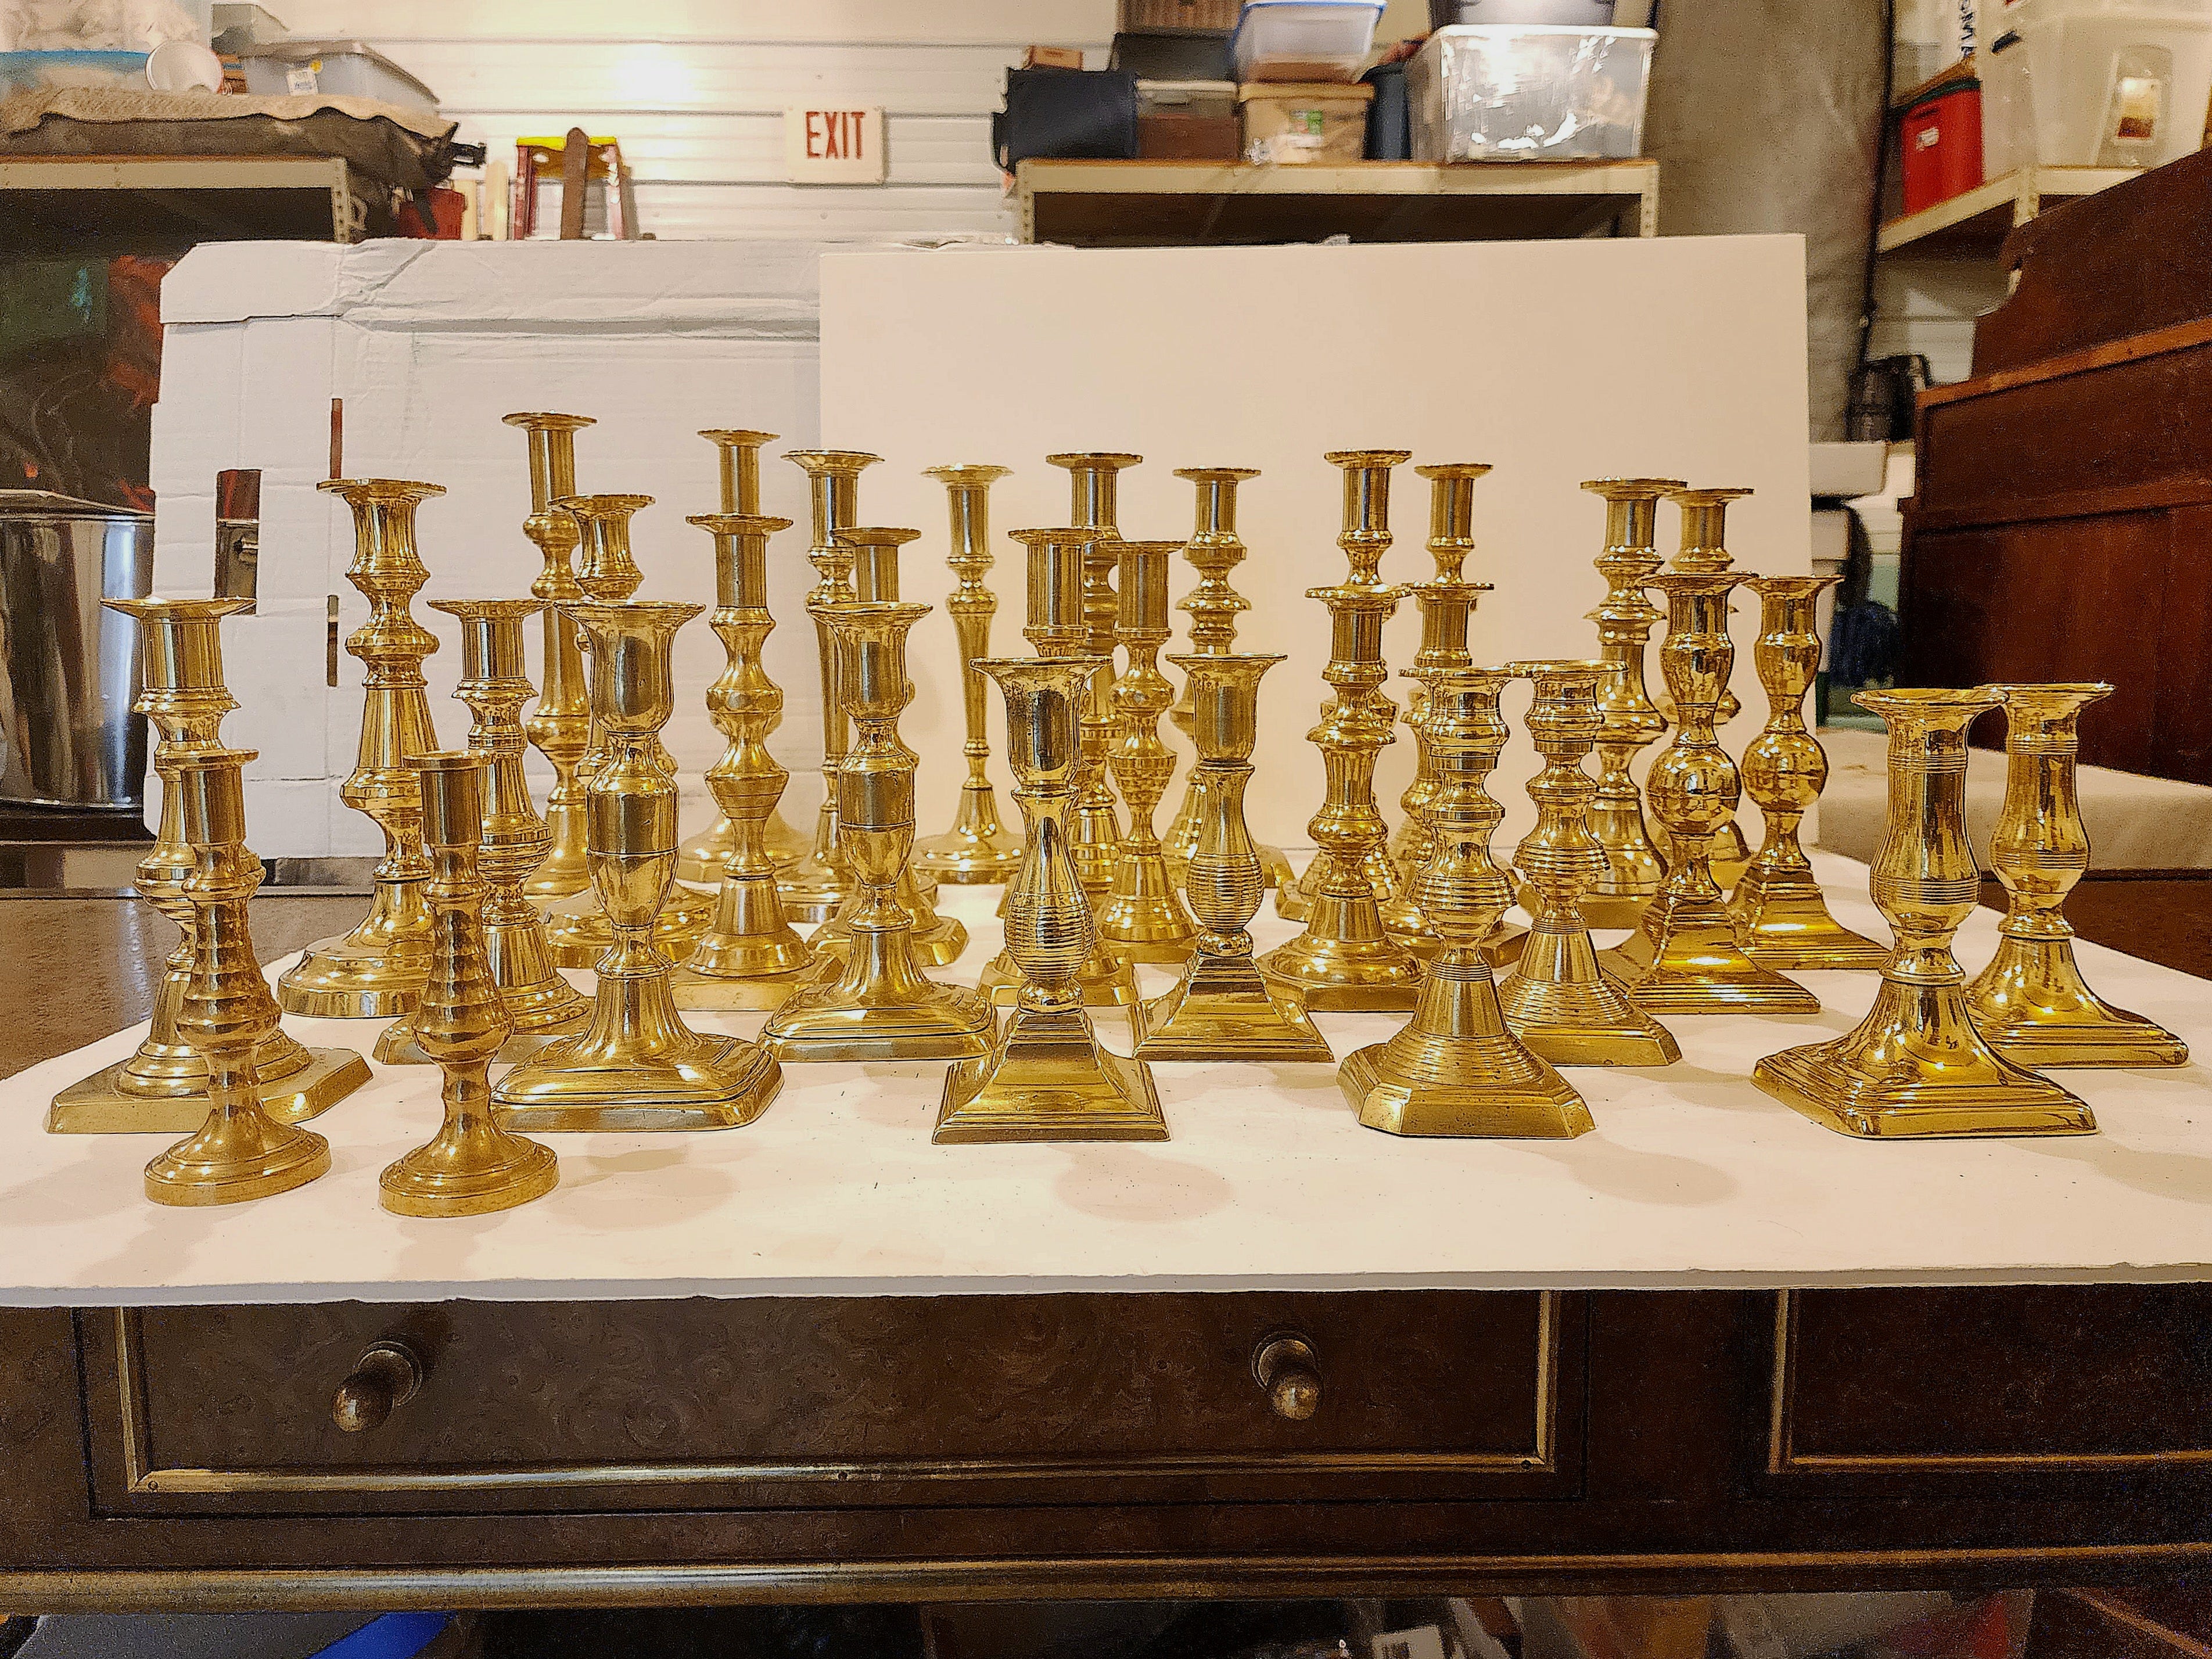 A large collection of Georgian brass antique taper or candlesticks including 32 sticks making 16 pairs. The collector used them to lean a place card on. 
A dinner party table set with 32 candlesticks with flickering tapers must be an enchanting